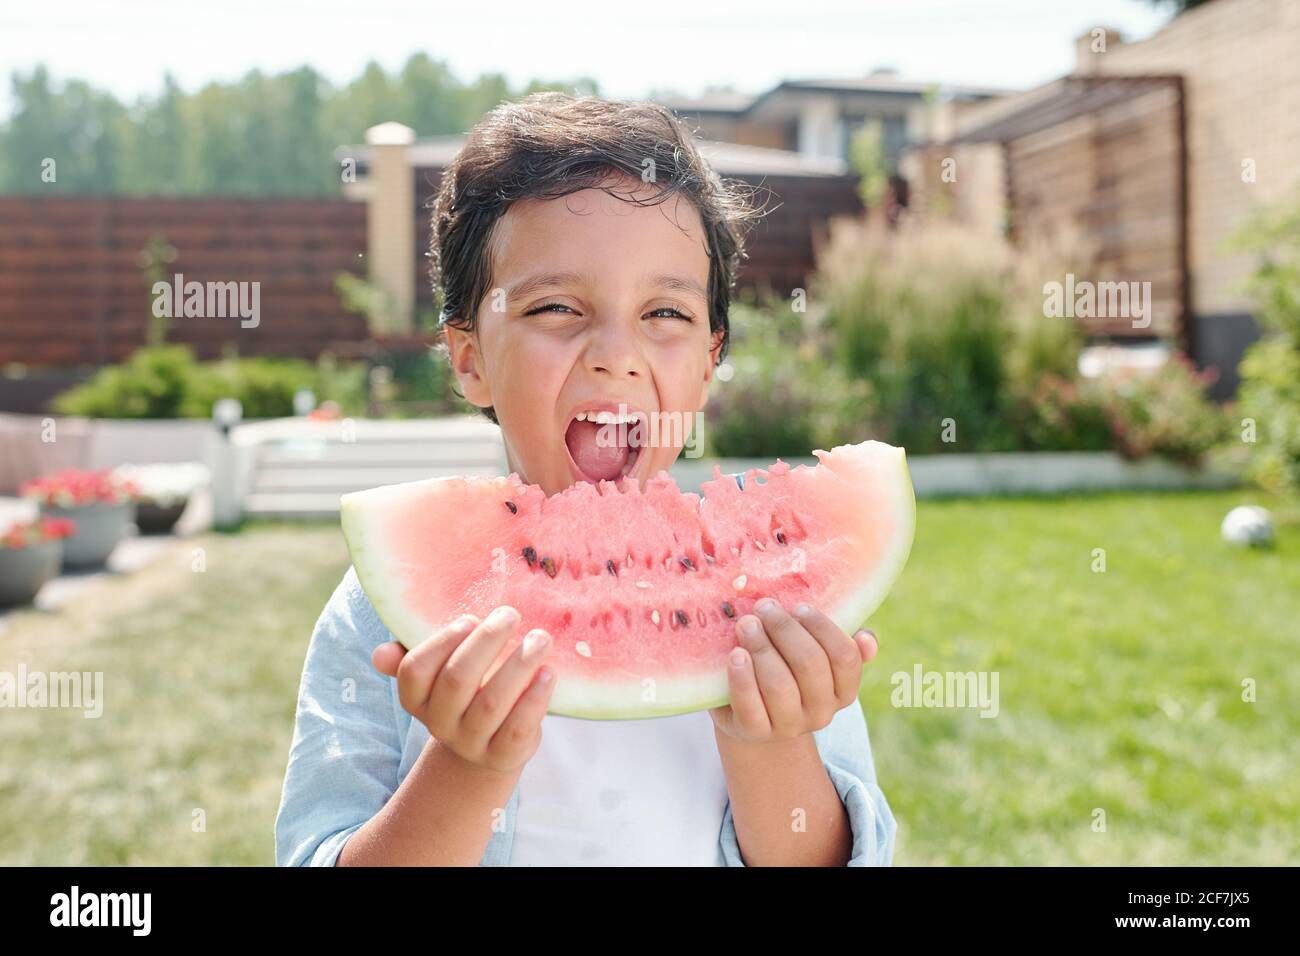 Medium close-up portrait shot of cheerful little boy standing in backyard eating piece of watermelon Stock Photo